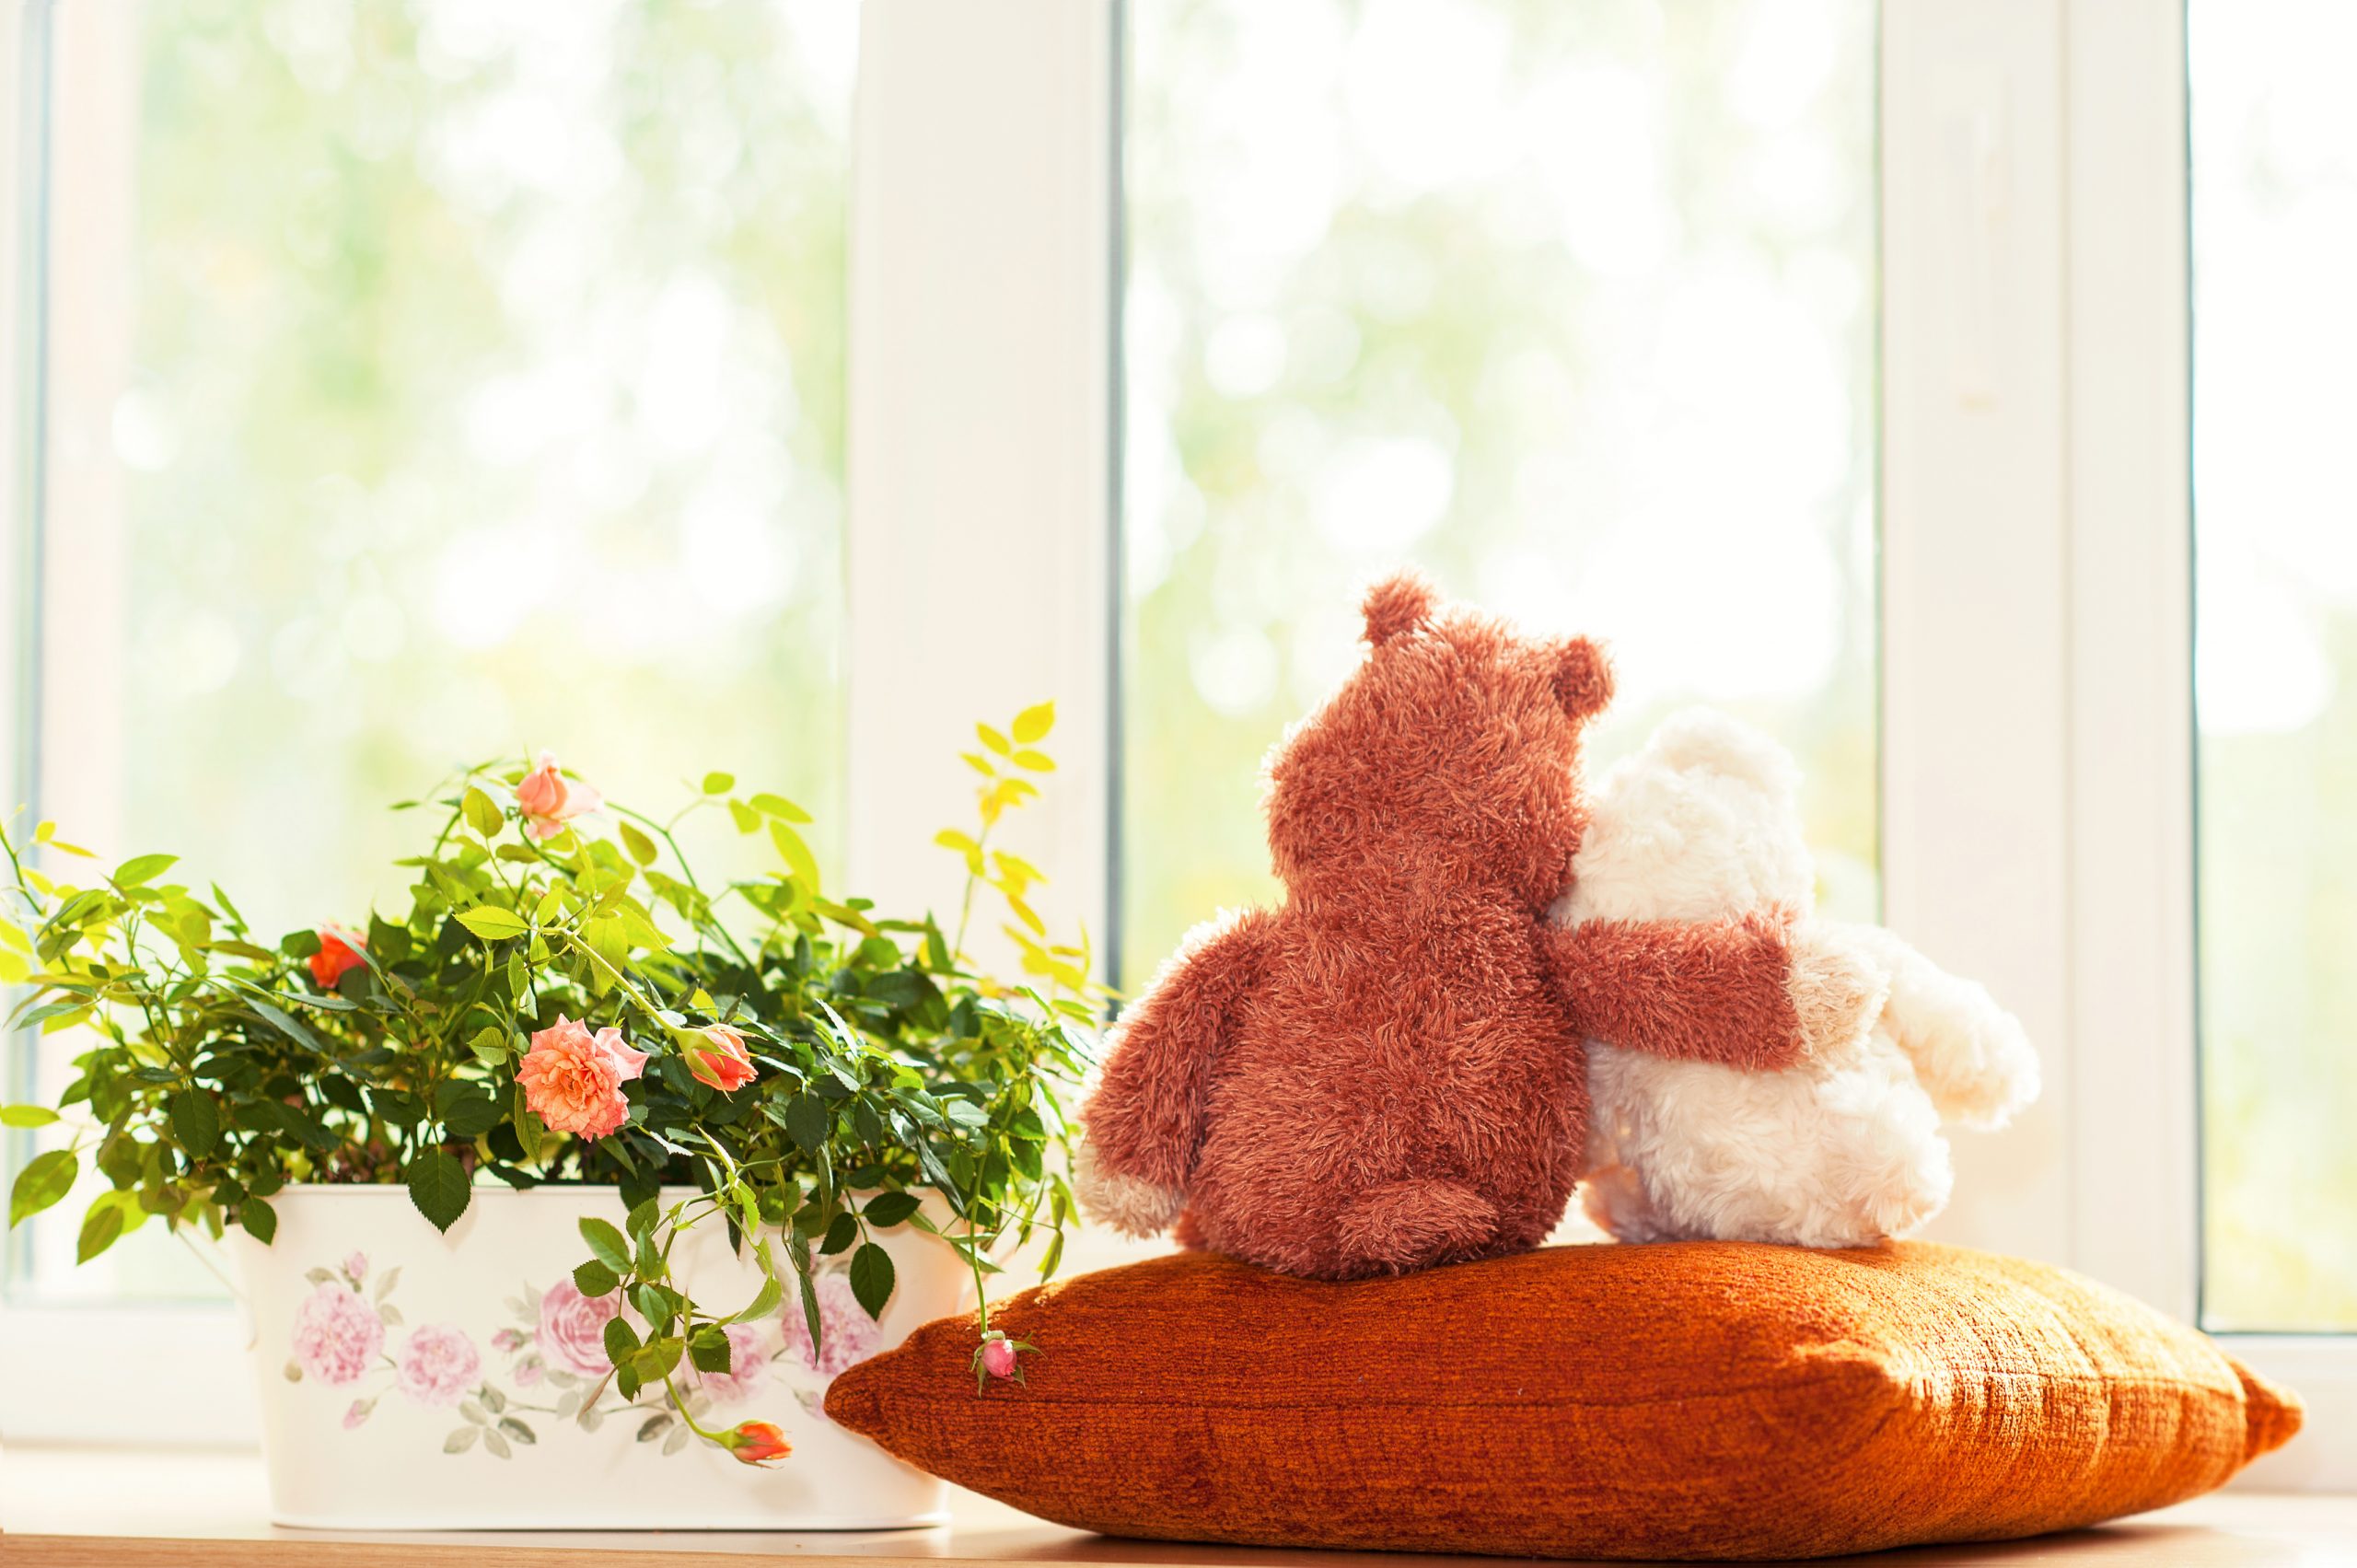 teddy bears together on pillow